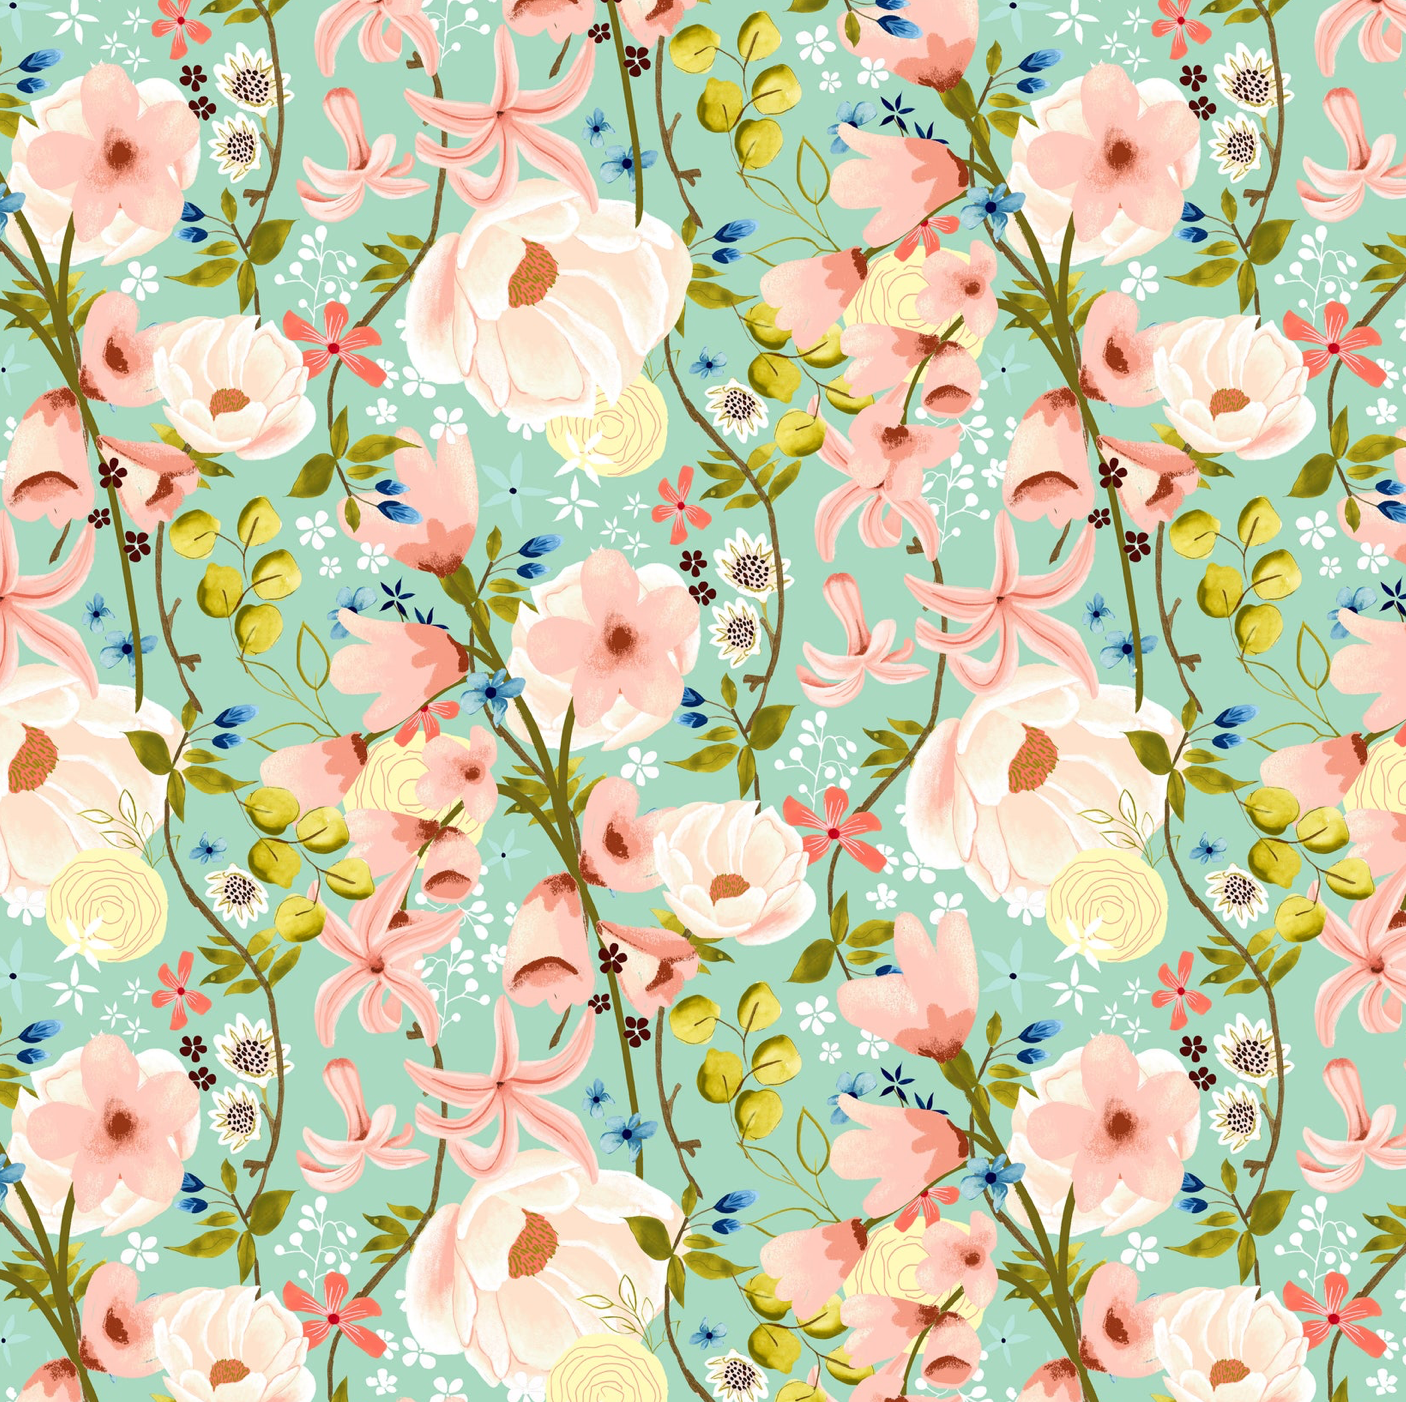 Serenity Blooms, Woven Memories Mint, SR24517, sold by the 1/2 yard, *PREORDER